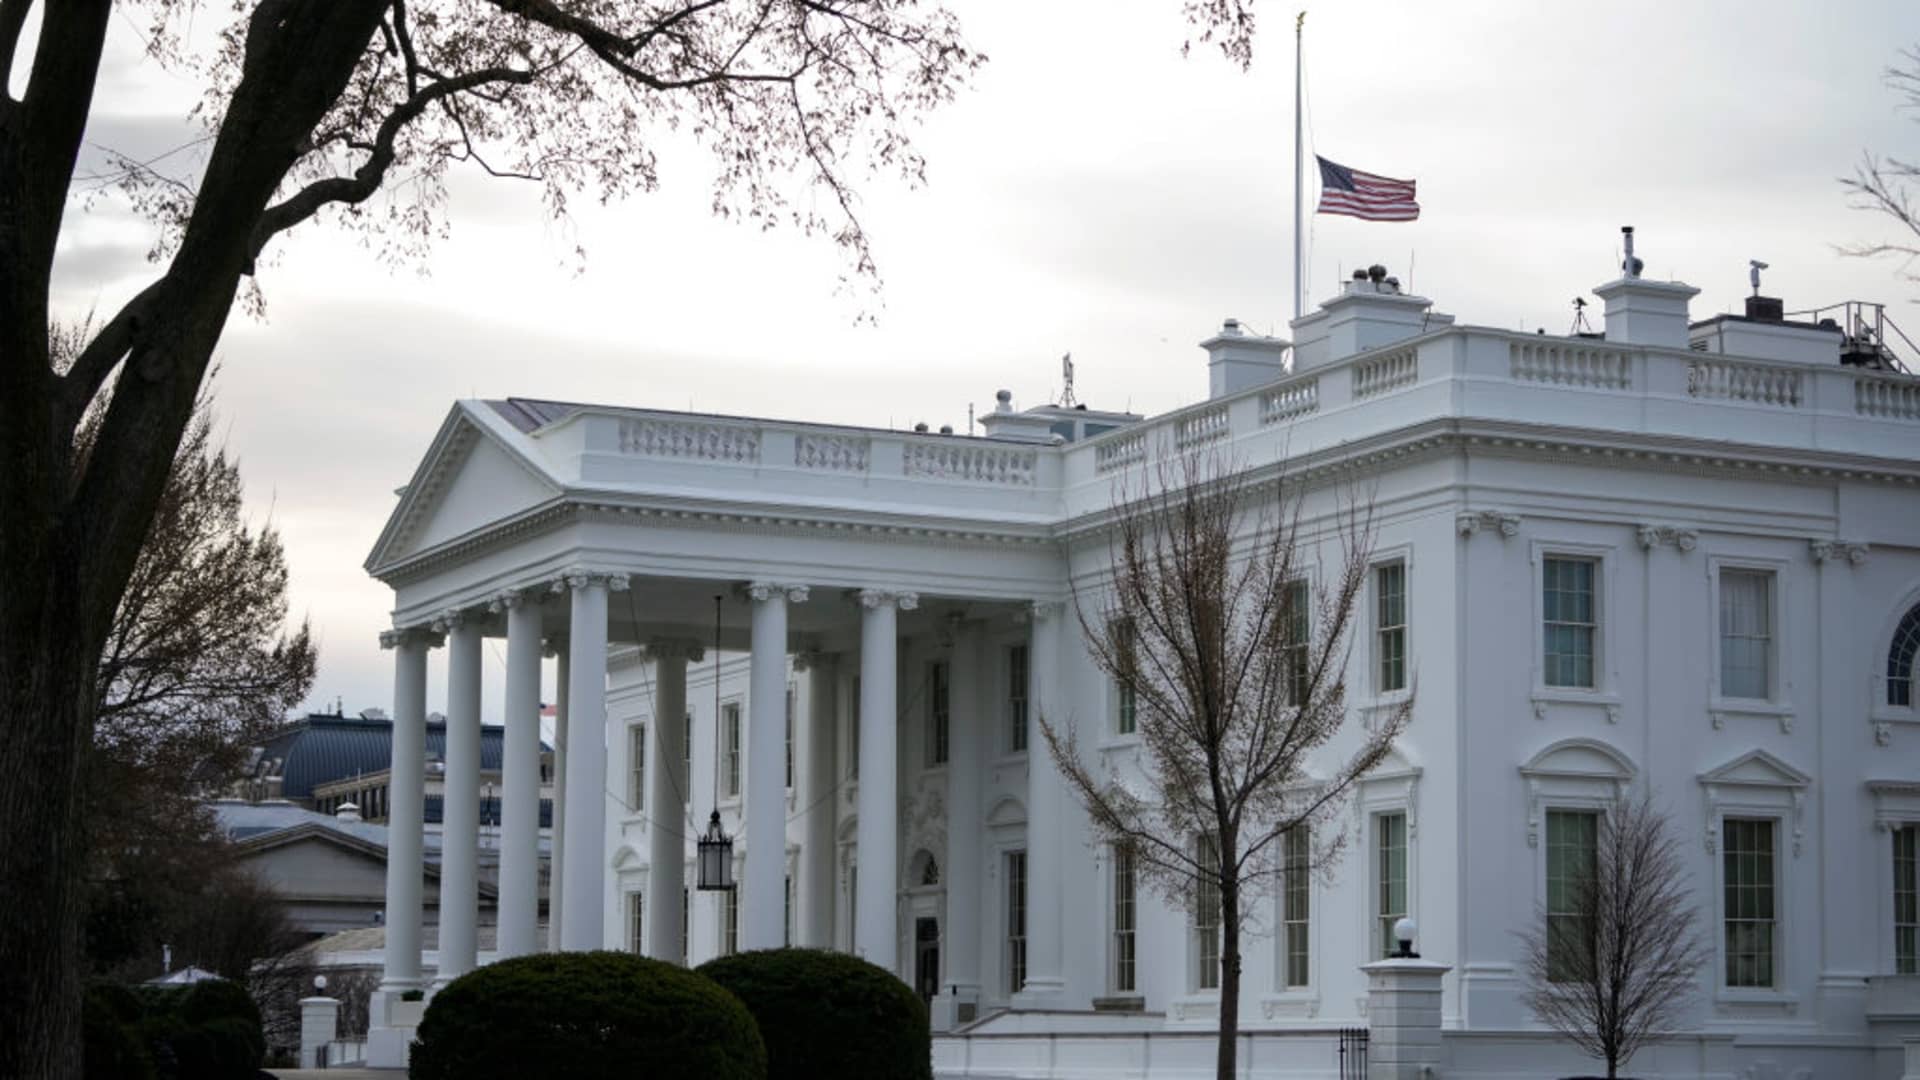 The American flag flies at half-staff at the White House in Washington, DC.